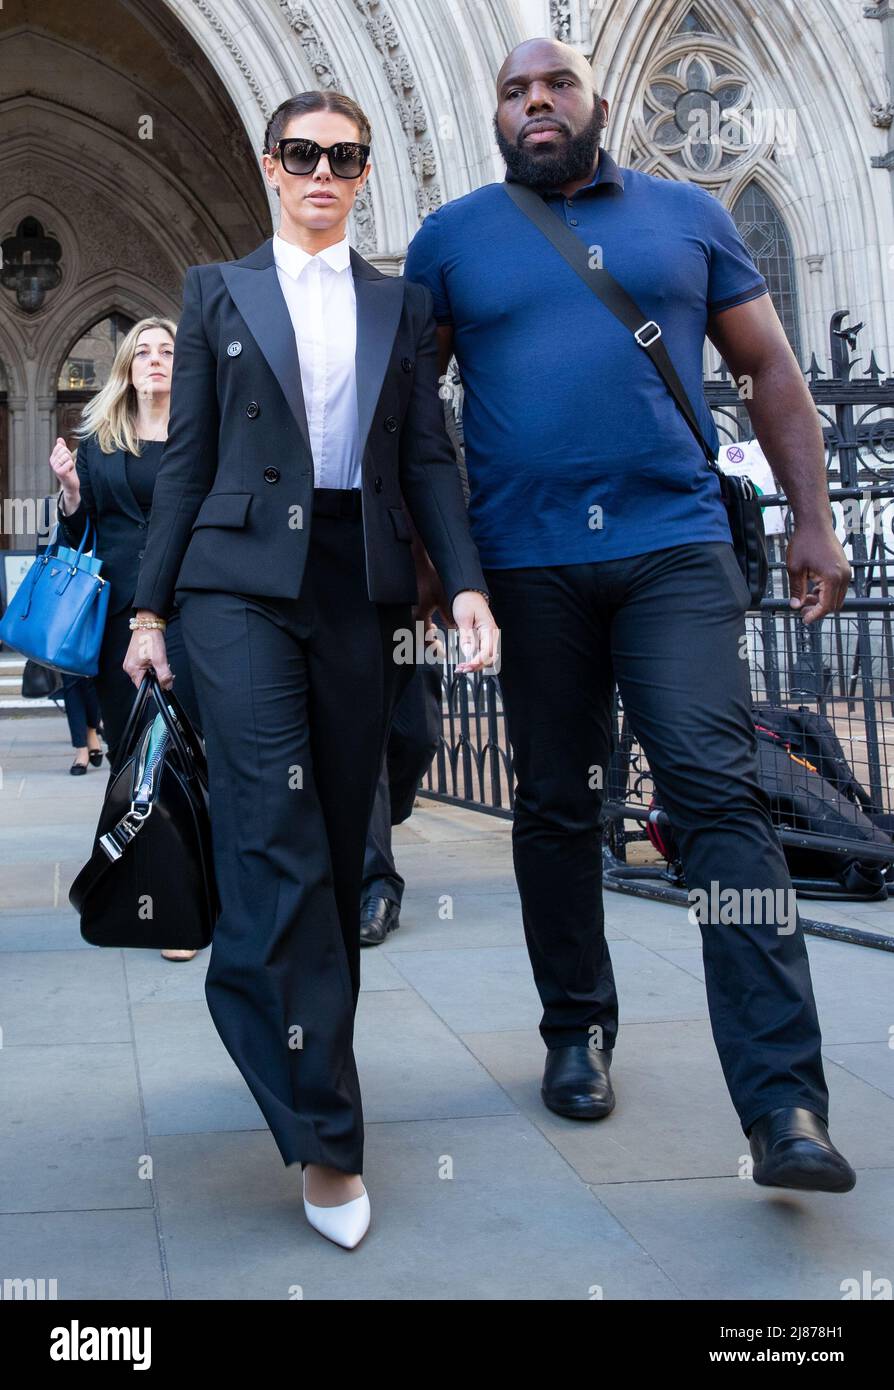 London, UK. 13th May, 2022. Rebekah Vardy leaves The Royal Courts of Justice after her libel case with Coleen Rooney, Coleen Rooney who is the wife of Derby County manager and former England football player Wayne Rooney, and Rebekah Vardy, wife of Leicester City striker Jamie Vardy are locked in a libel battle also known as the 'Wagatha Christie' trial after accusations that Mrs Vardy leaked false stories about Mrs Rooney to the press. Credit: Lucy North/Alamy Live News Stock Photo